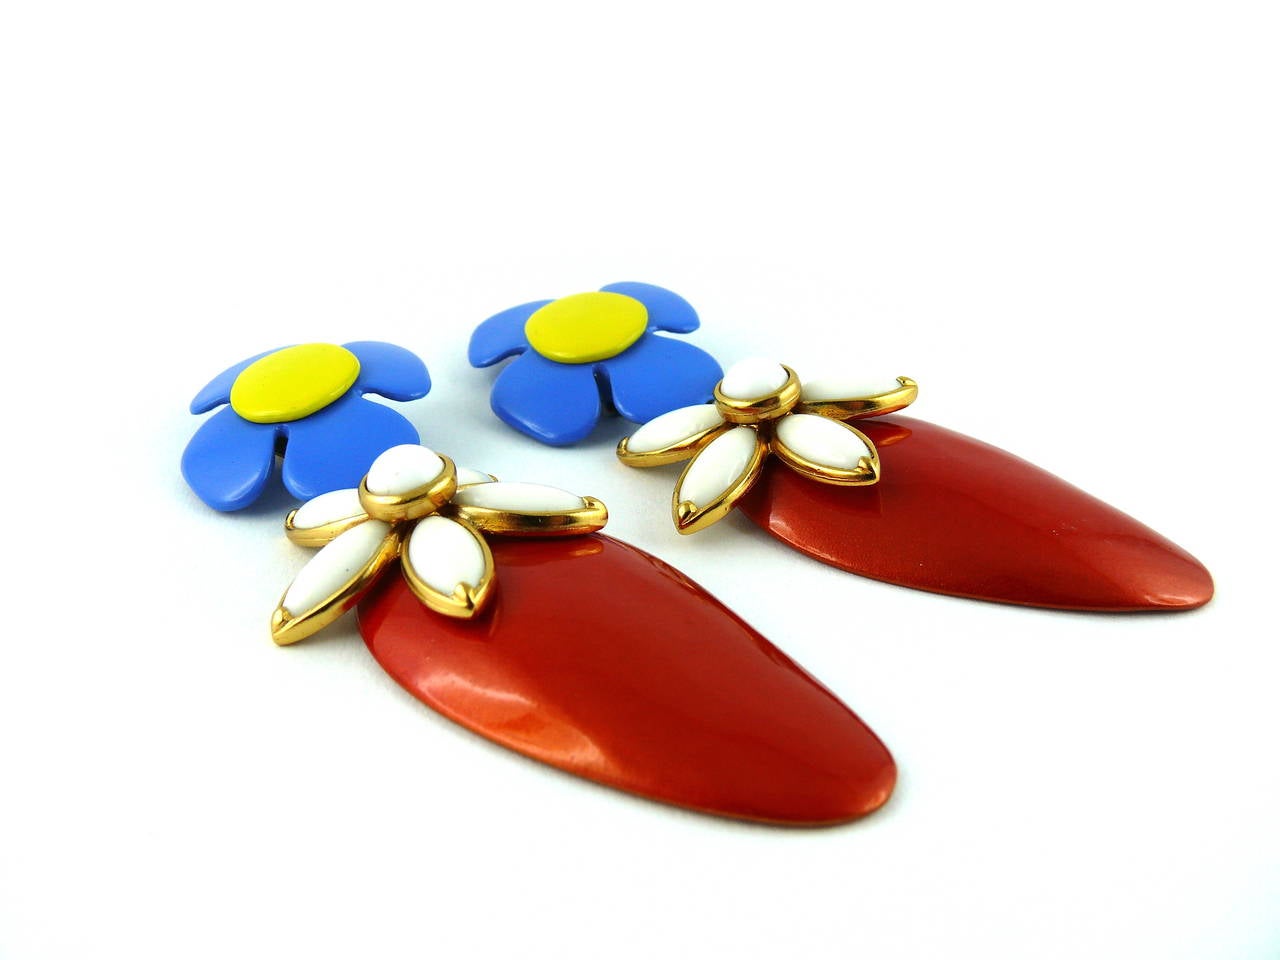 YVES SAINT LAURENT vintage massive flower dangling earrings (clip-on) with vibrant pop colors.

A rare find !

Marked YSL Made in France.

Pristine condition. New old stock.

Note
As a buyer, you are fully responsible for customs duties,